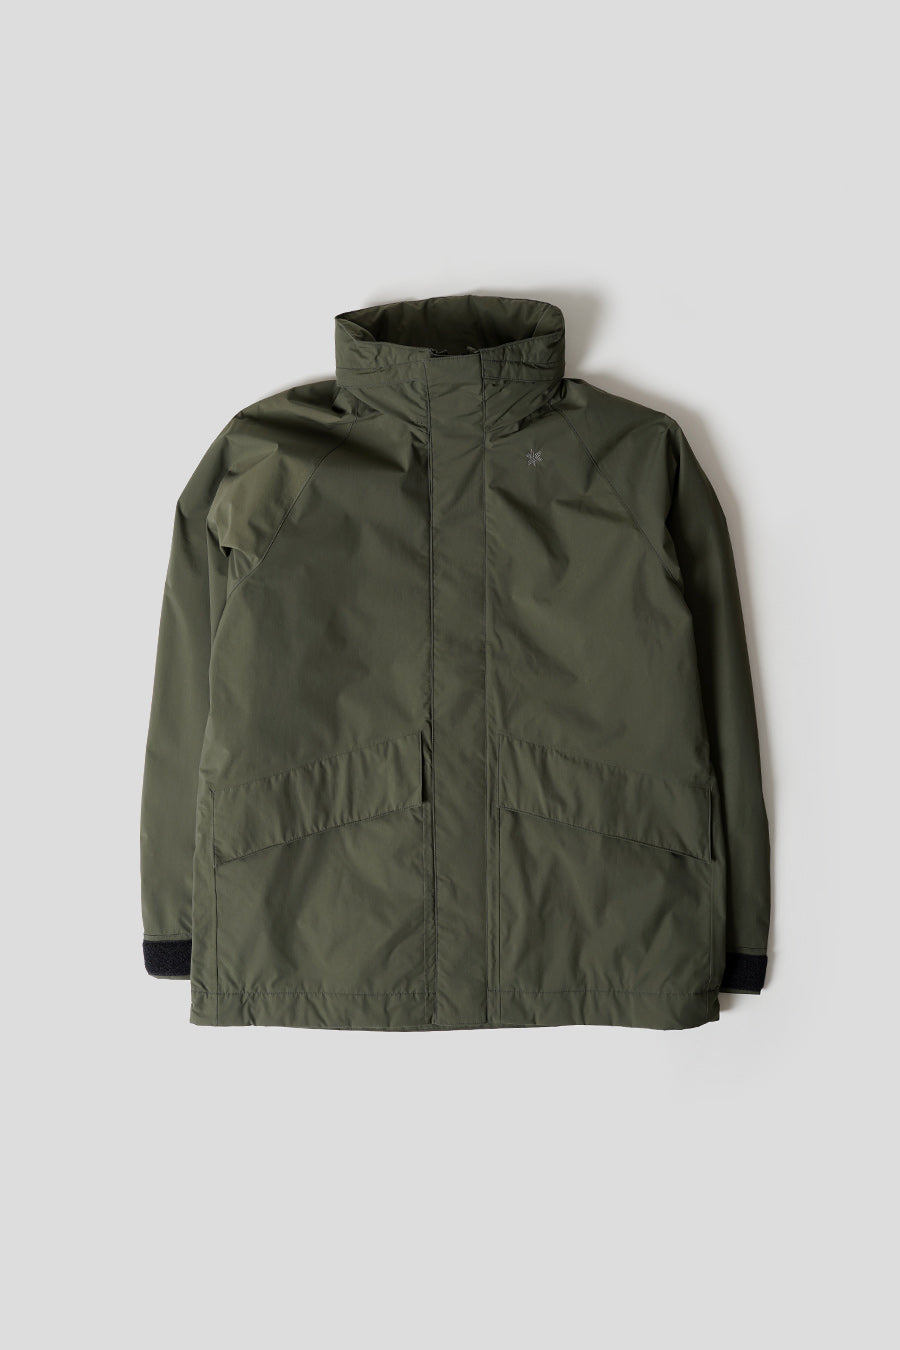 GOLDWIN - PERTEX SHIELD ACT ROVER JACKET OLIVE GREEN - LE LABO STORE